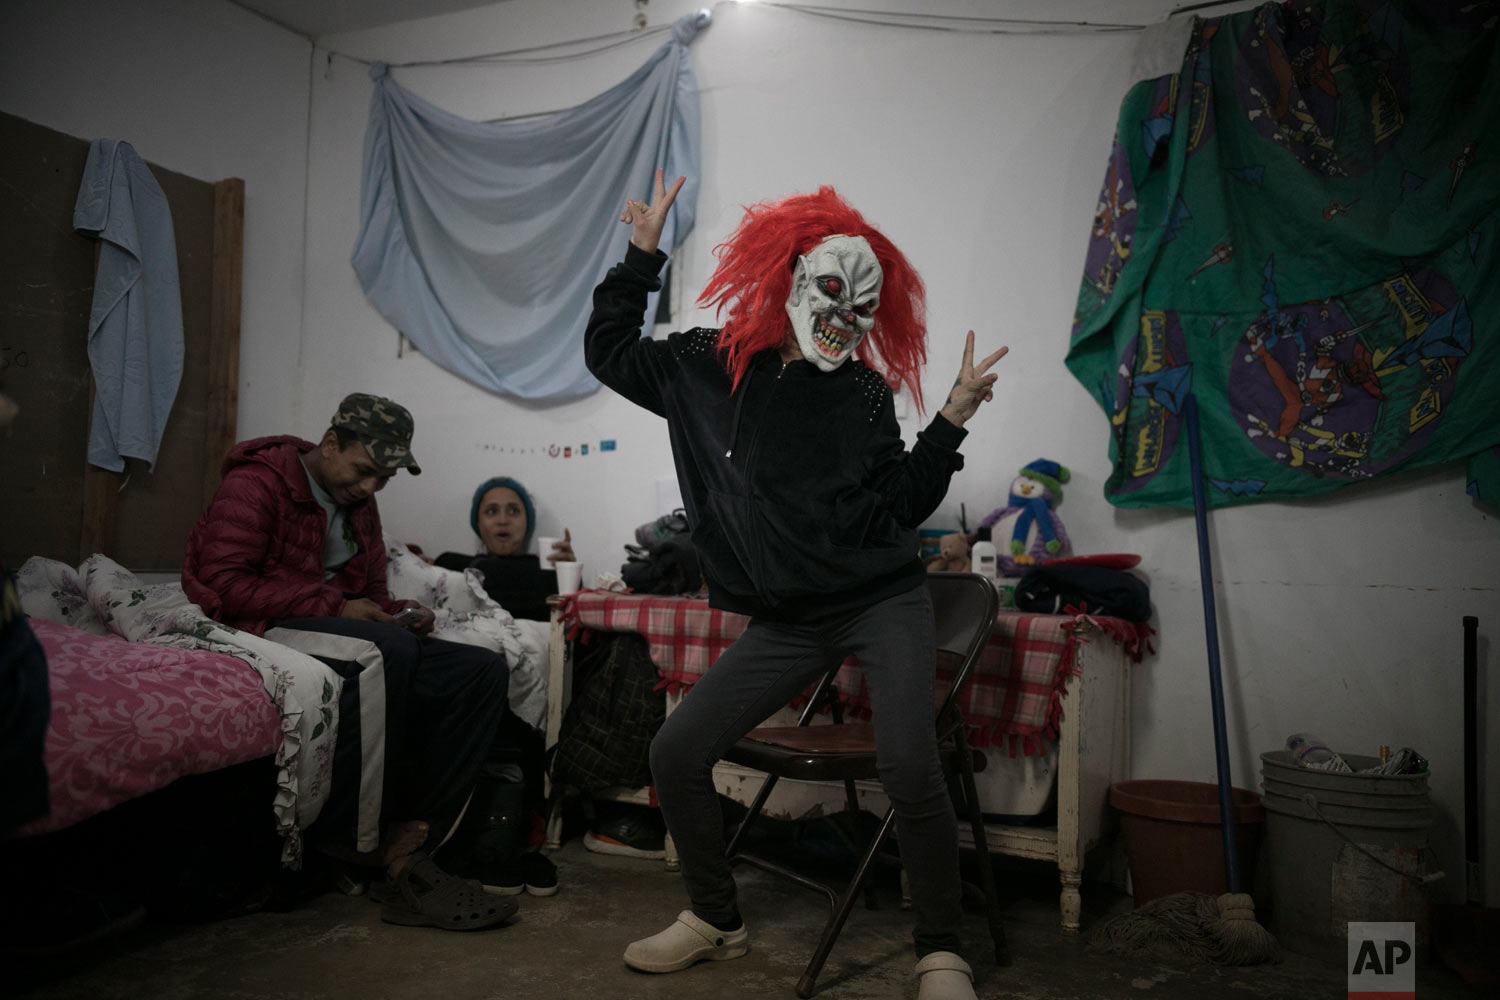  Central American teen migrants, 17-year-old Josue Mejia Lucero, left, and 15-year-old Milagro, relax on their bed as Milagro's sister Xiomara, 13, jokes around in a clown mask, at the Agape World Mission shelter where they are staying in Tijuana, Me